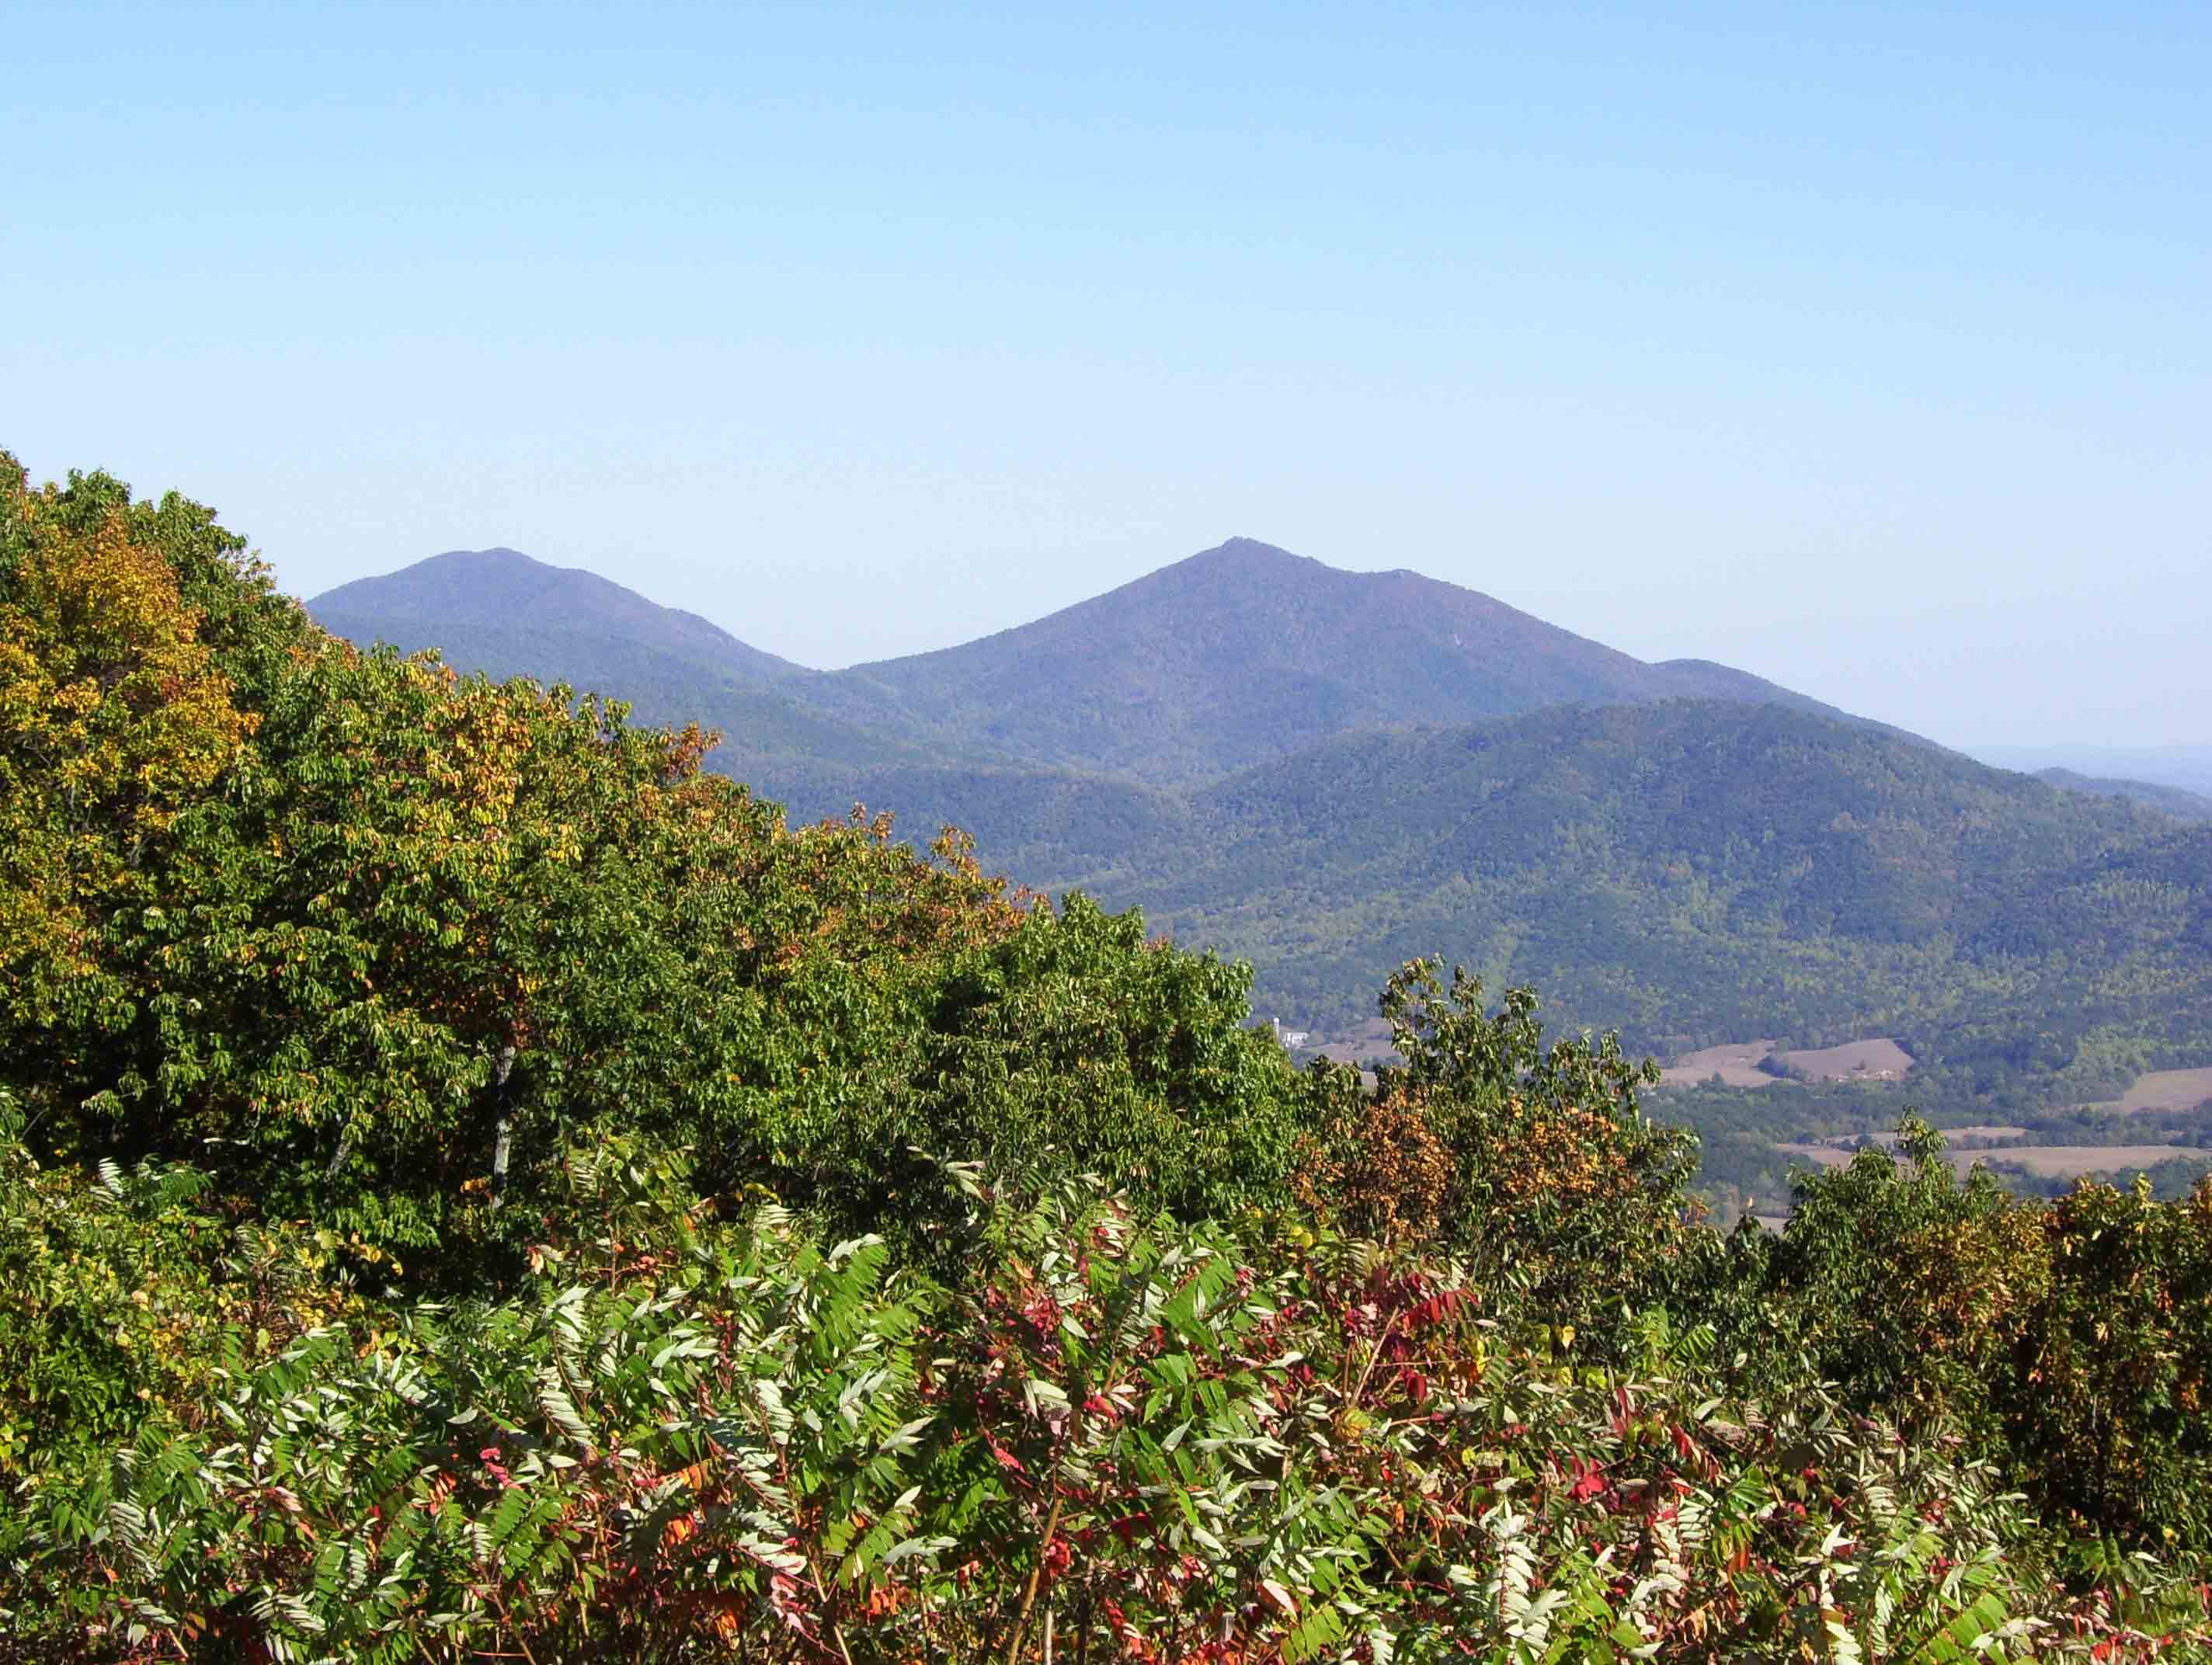 View of Peaks of Otter from Montvale Overlook (mile 6.2).  Courtesy dlcul@conncoll.edu